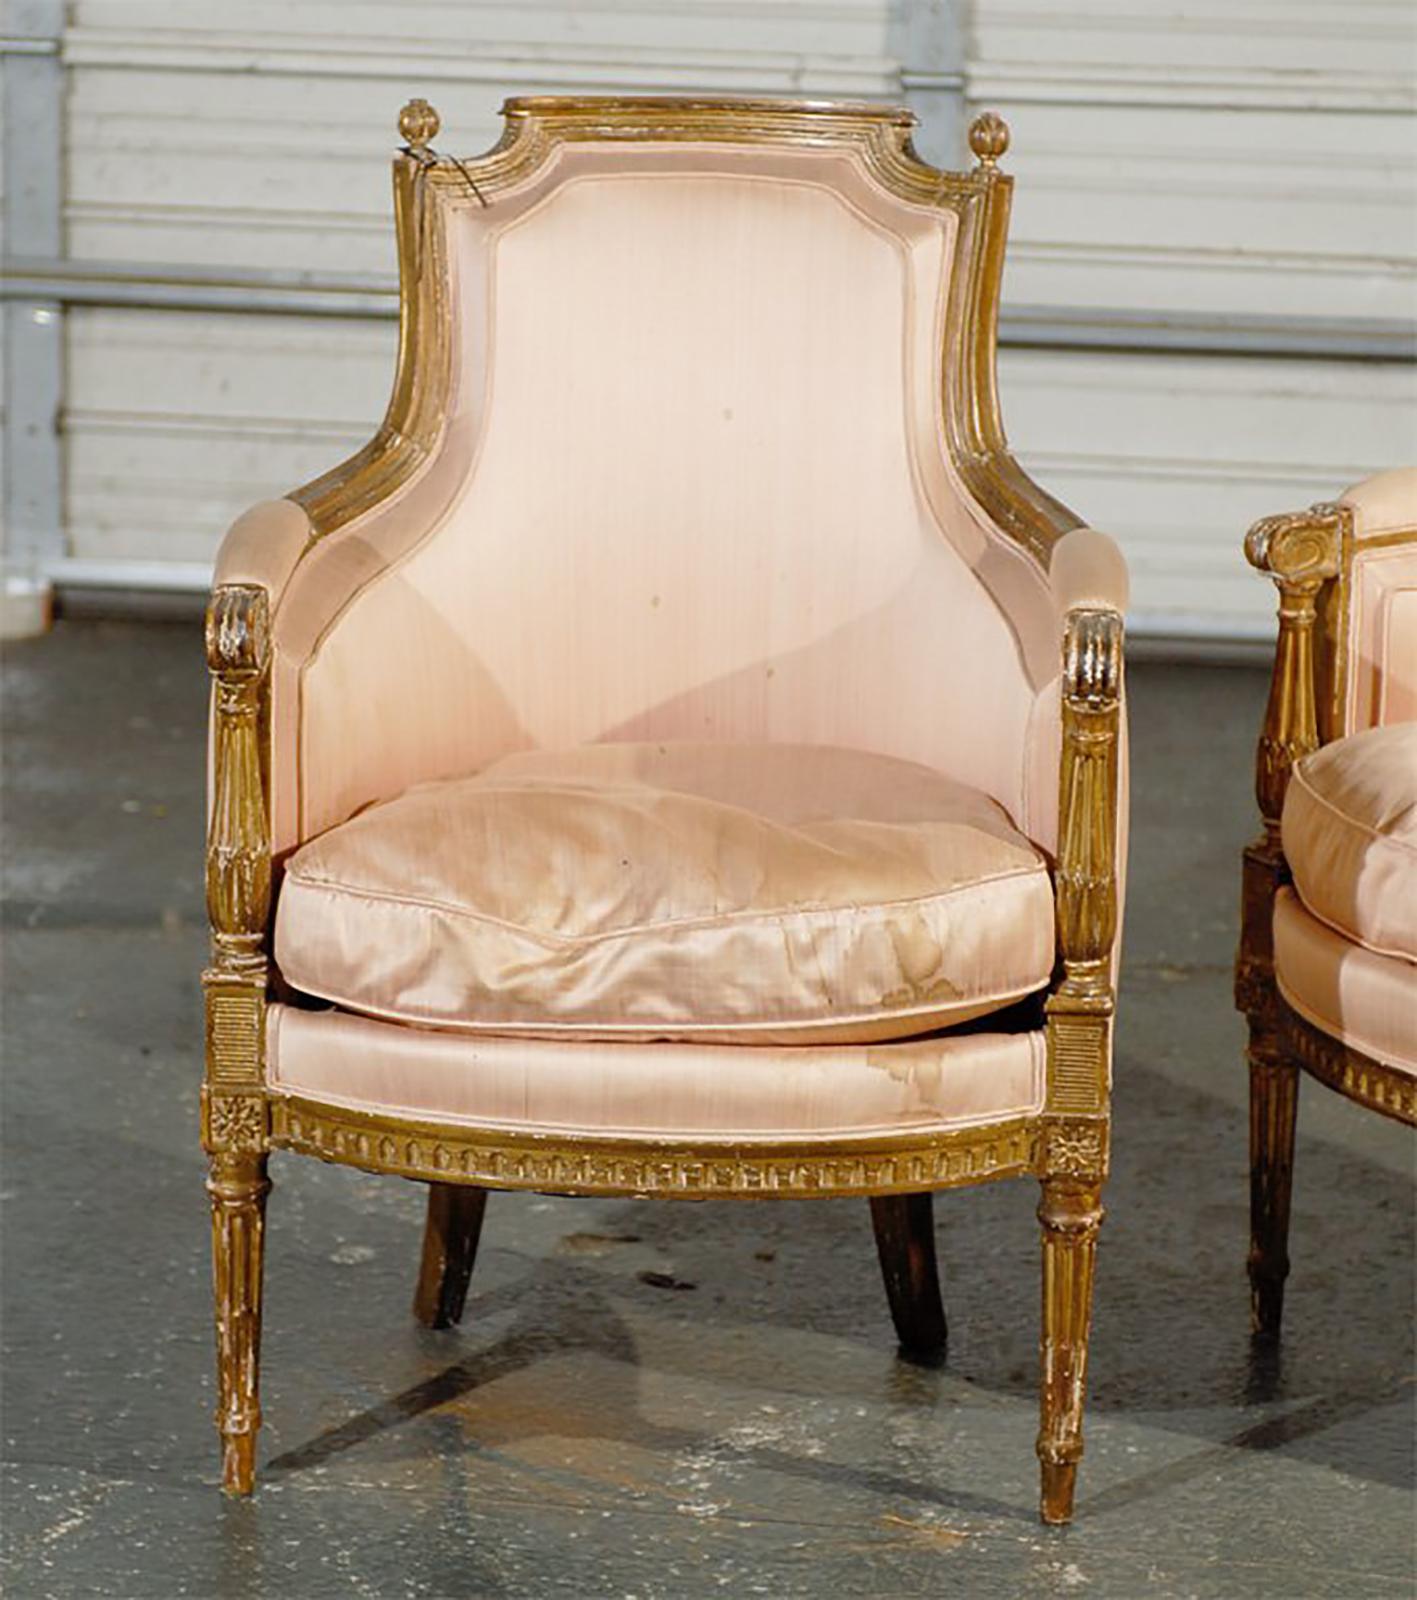 Pair of 19th-20th century Louis XVI style giltwood bergère chairs.
Seat:21